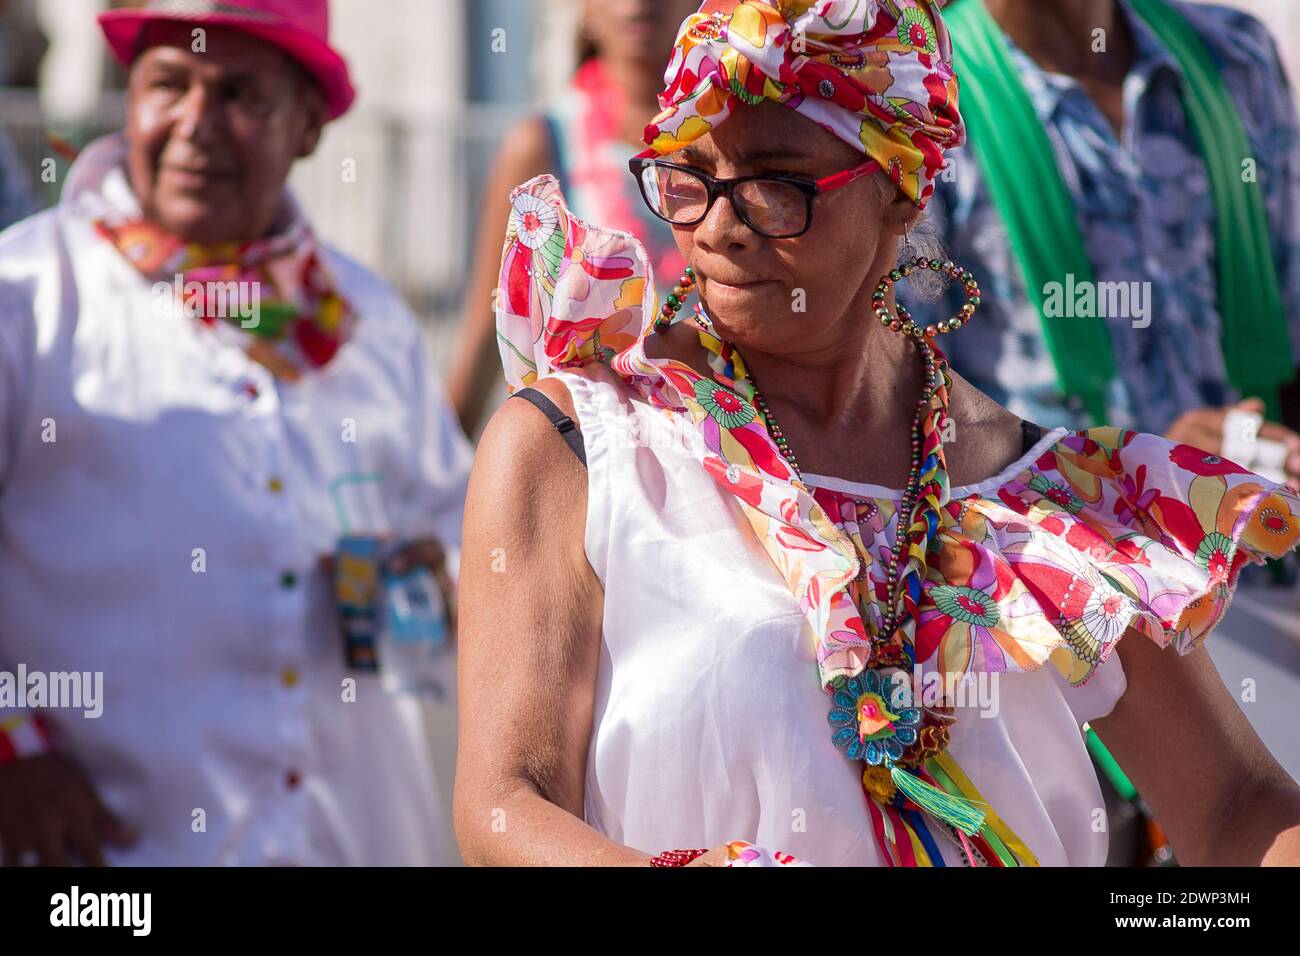 BARRANQUILLA, COLOMBIA - Dec 20, 2020: The comparsa parades their traditional colorful costumes at the Barranquilla carnival Stock Photo